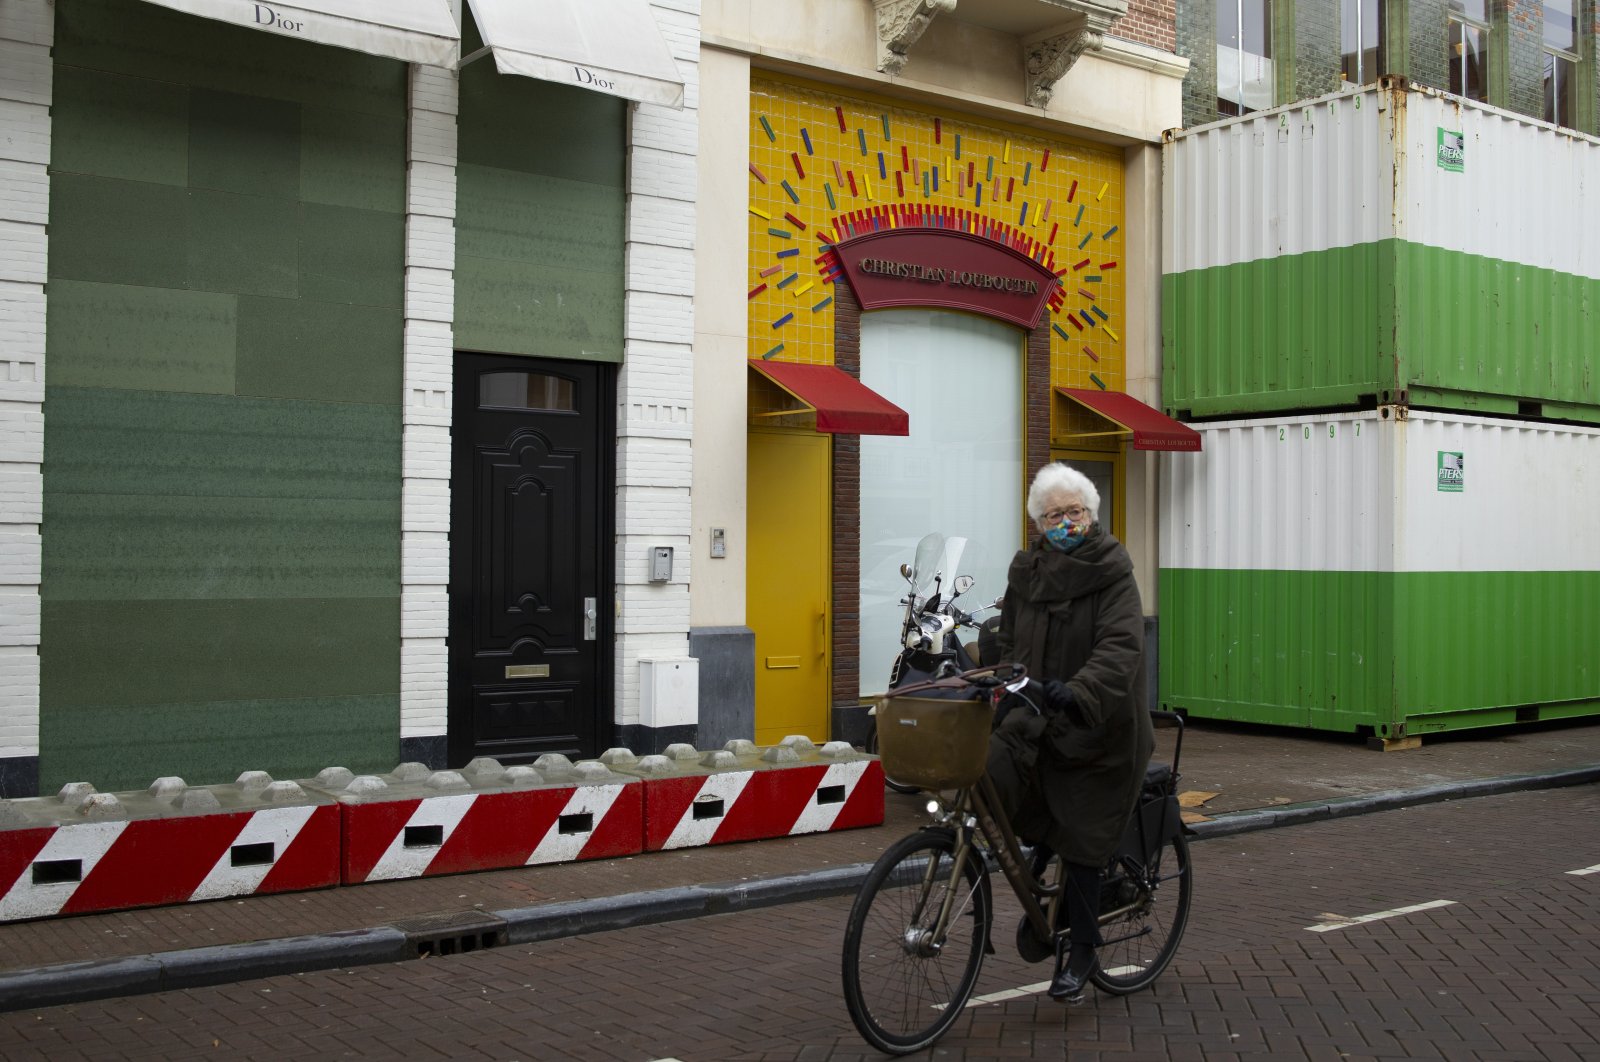 A woman cycles past luxury goods stores that are boarded up, protected by concrete blocks and sea containers at P.C. Hooft street in Amsterdam, the Netherlands, Friday, Jan. 29, 2021. (AP Photo)